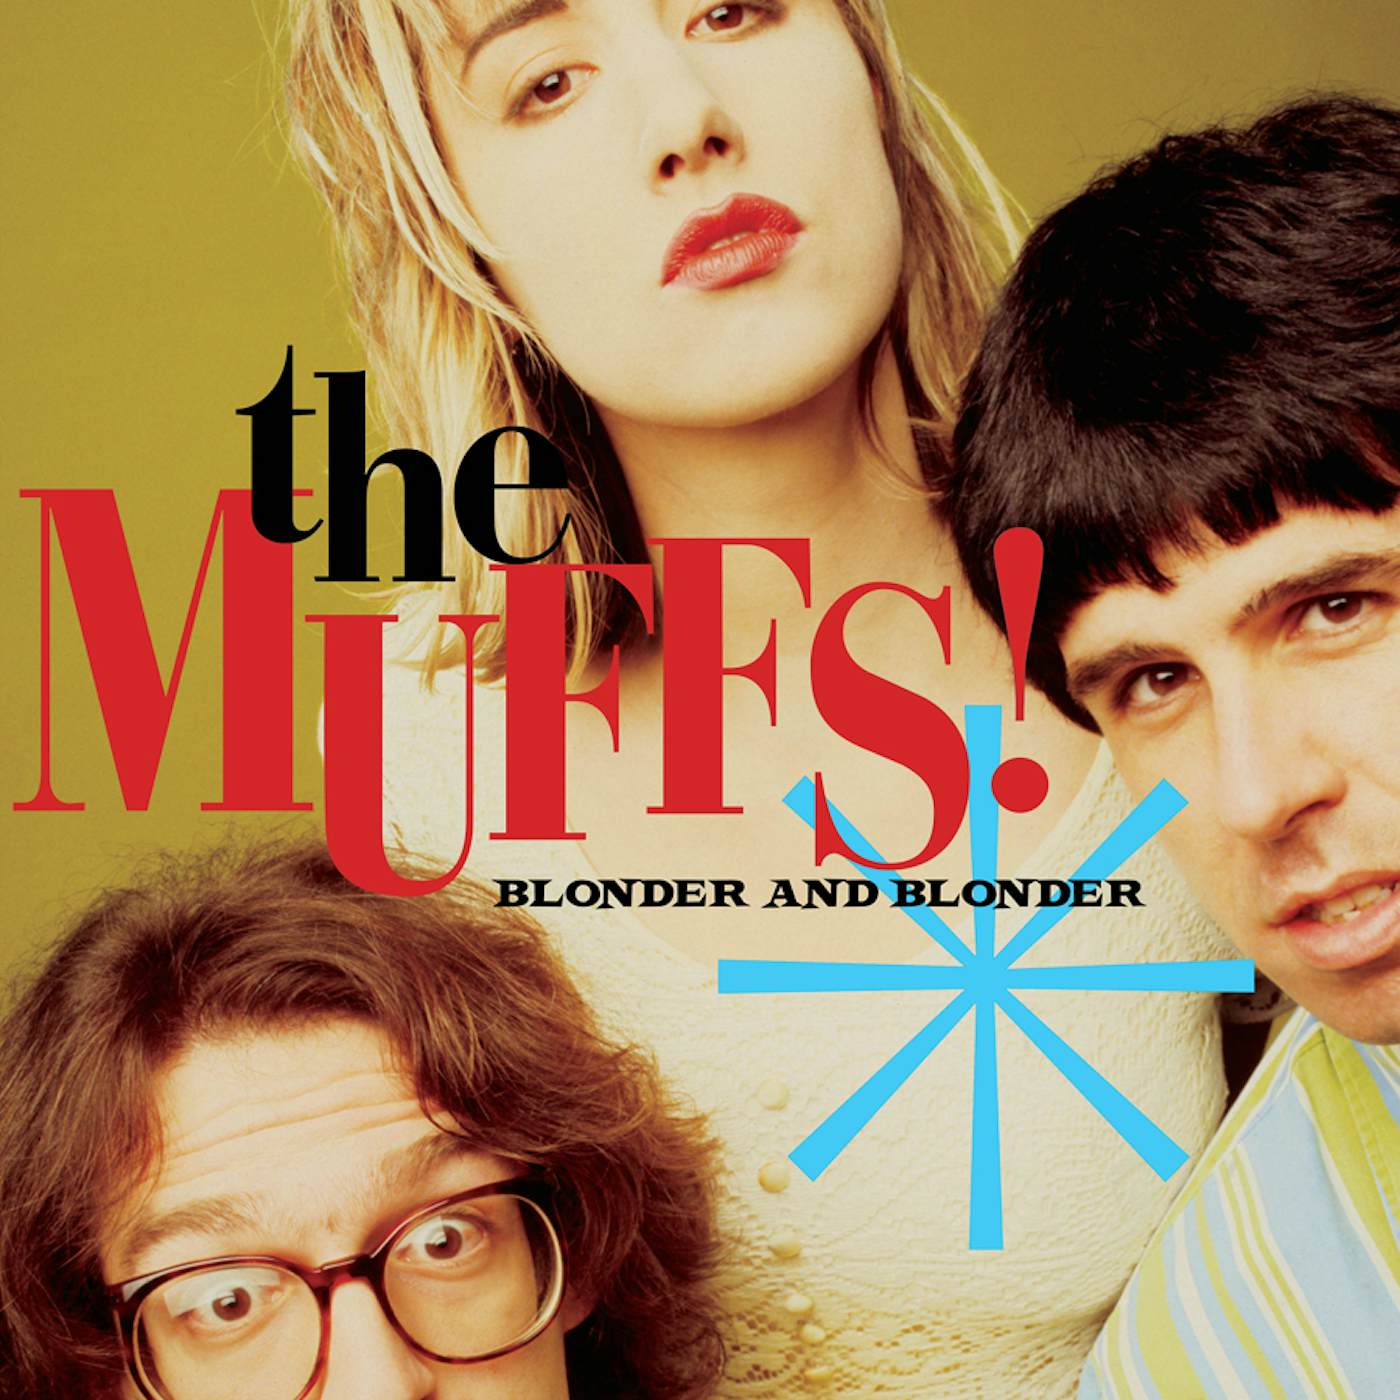 The Muffs Blonder And Blonder Vinyl Record